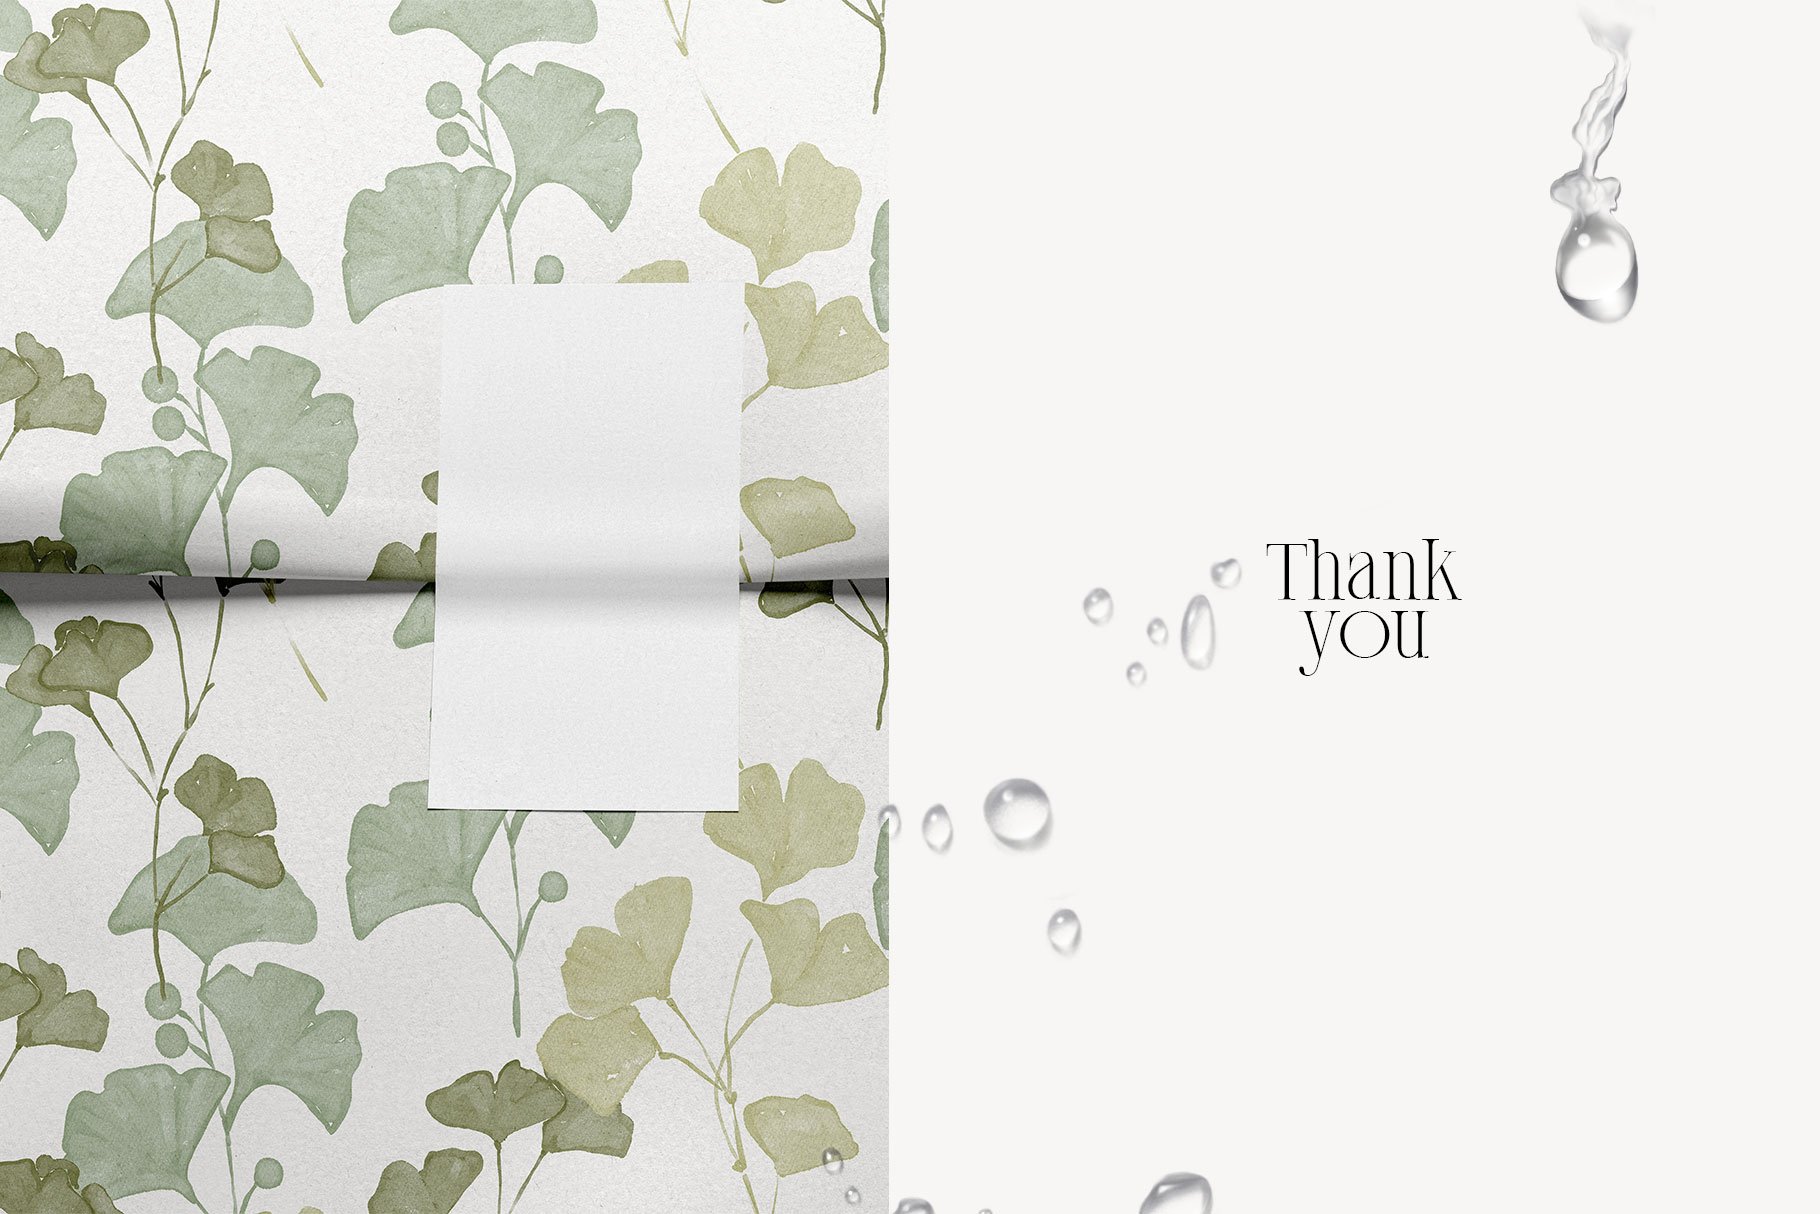 Thank card with water drops on it.